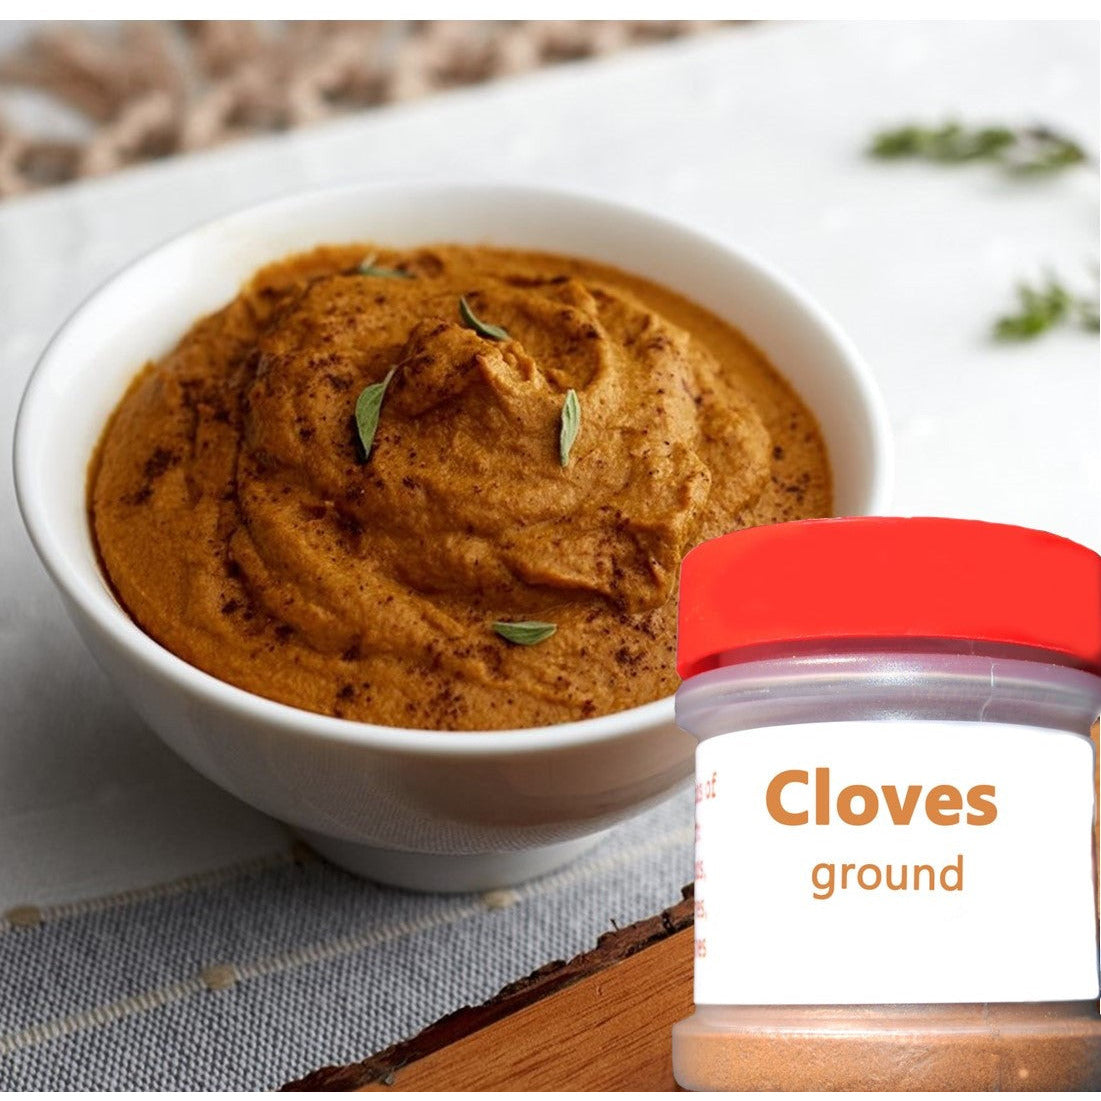 Ground Cloves spice 0.7oz - Unique Flavors Spices Unique Flavors LLC  cloves in ham cloves health benefits spices holiday baking cloves tea cloves on ham cloves benefits cloves powder thanksgiving dishes Christmas dishes